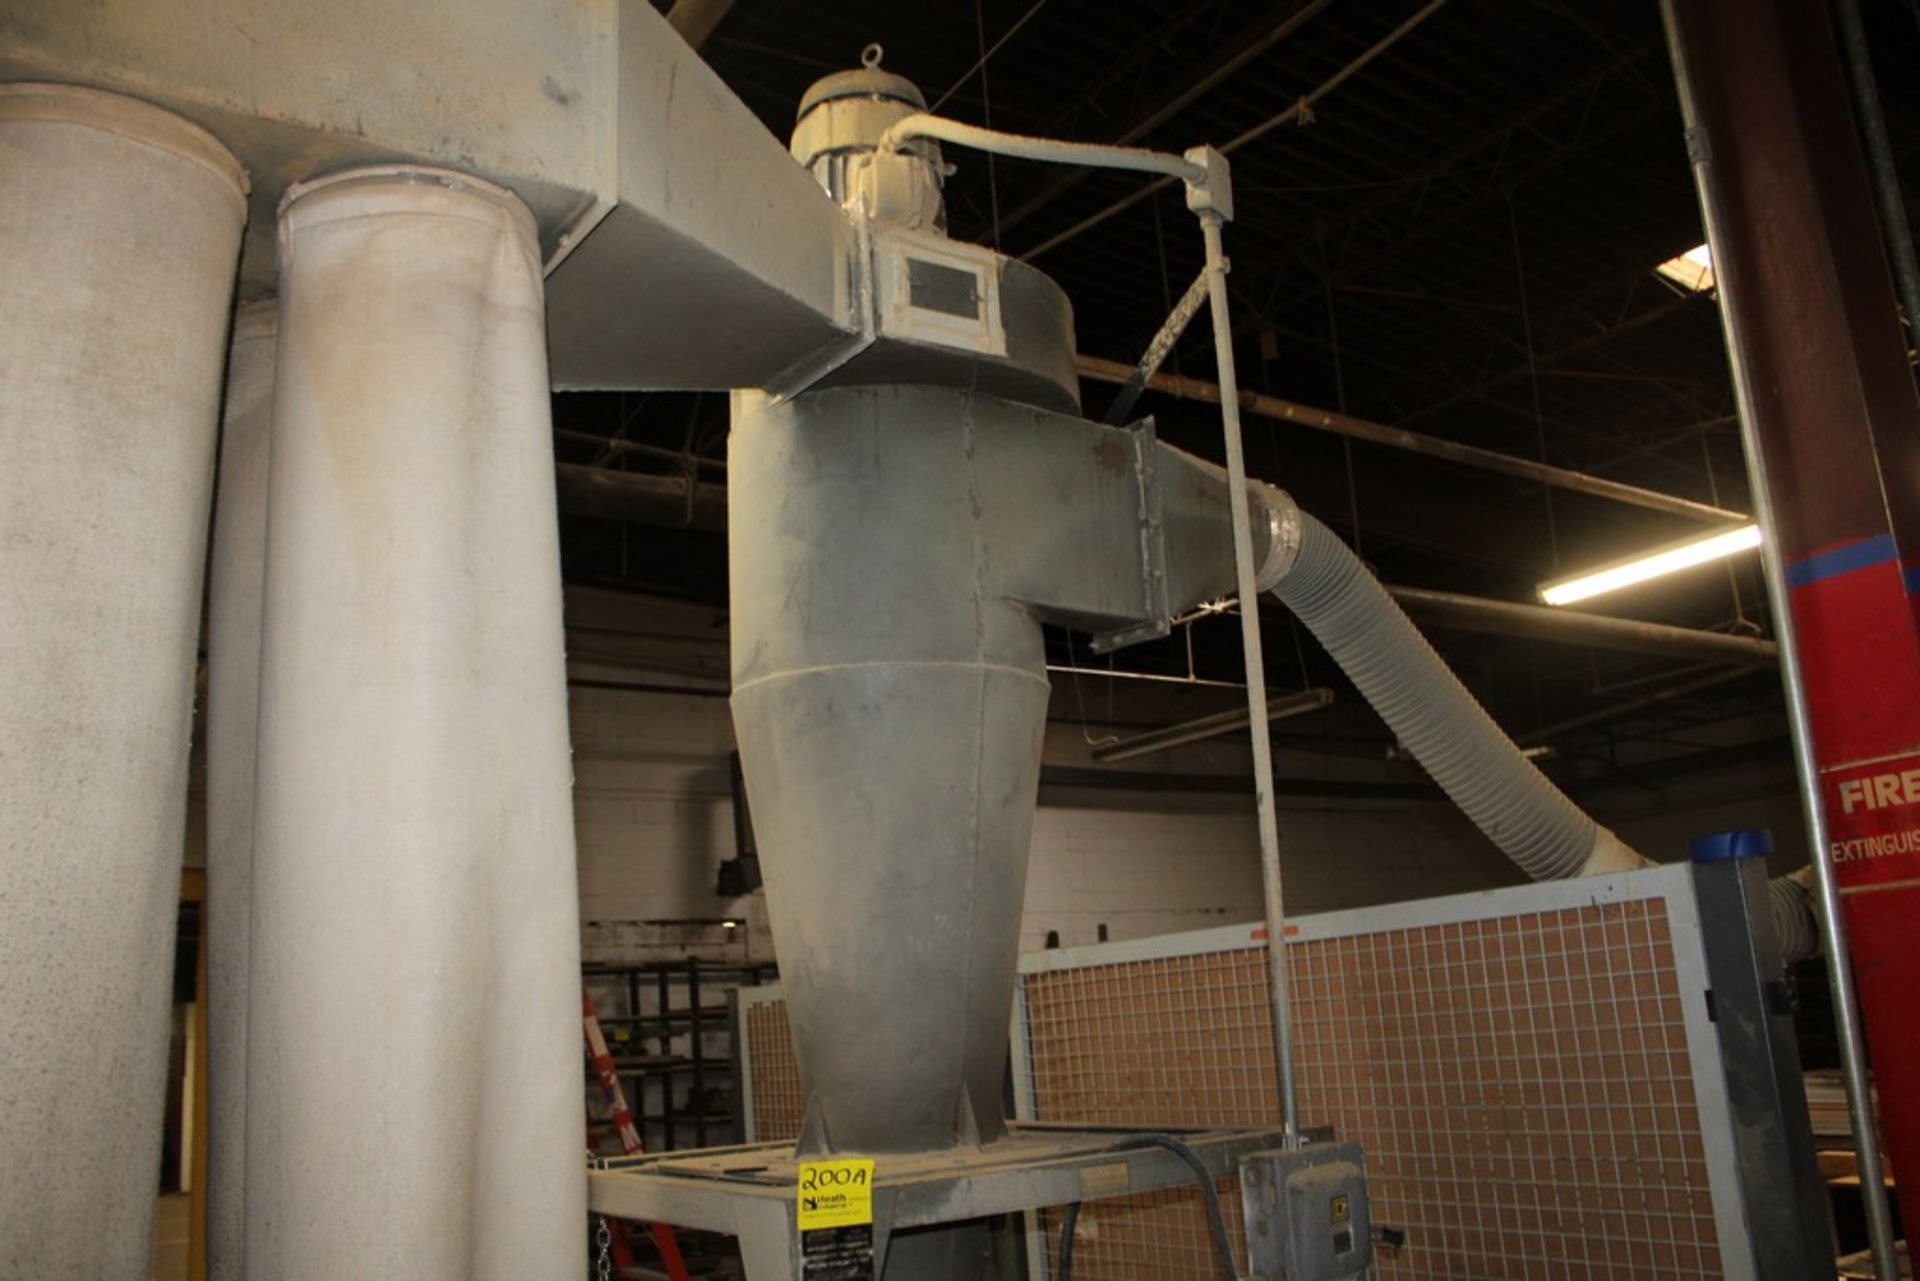 TORIT 4-BAG DUST COLLECTOR, MODEL 20-5-FB5-5, S/N 70877, 3-PHASE, 5HP, 220/440 - Image 2 of 3